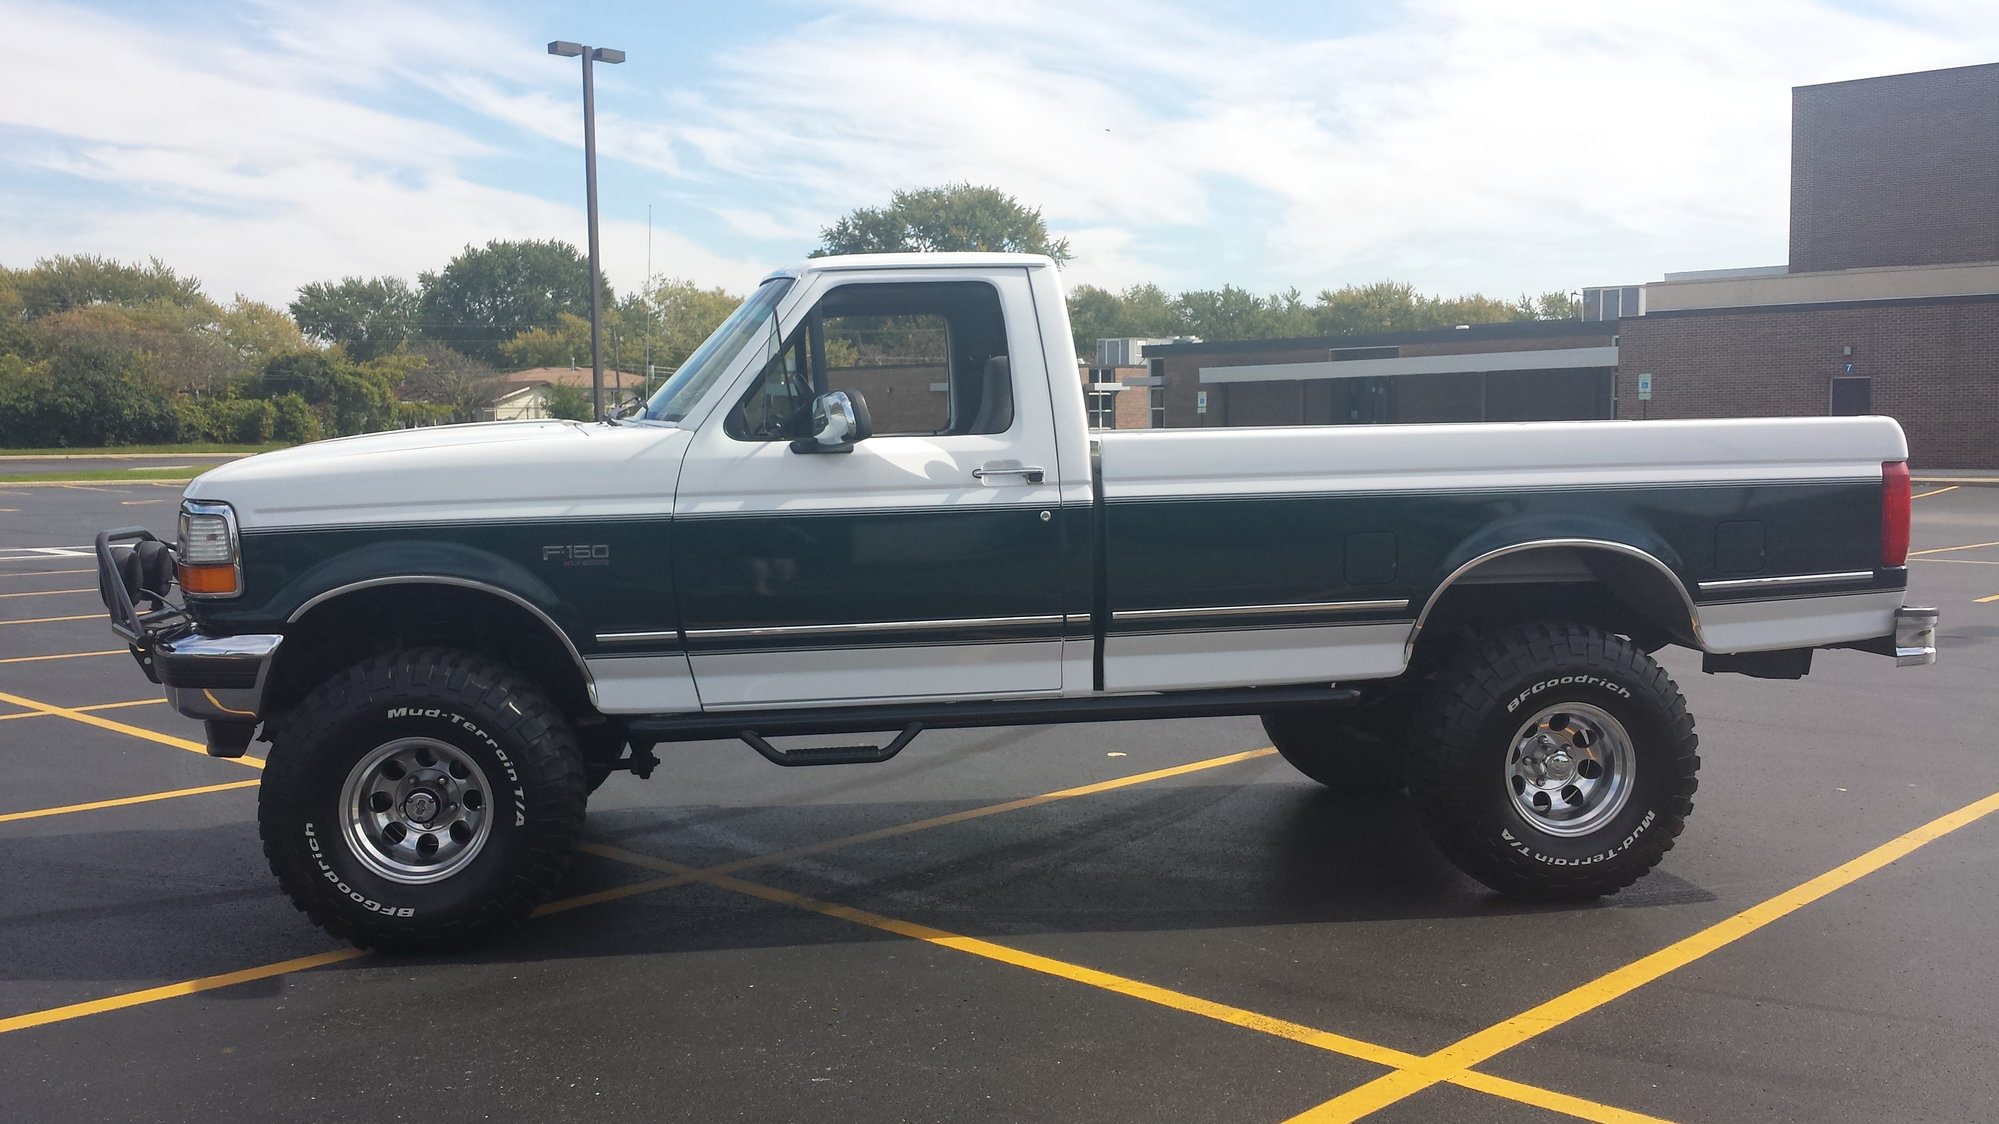 Show us your 1990-1996 f150s with lift kits.